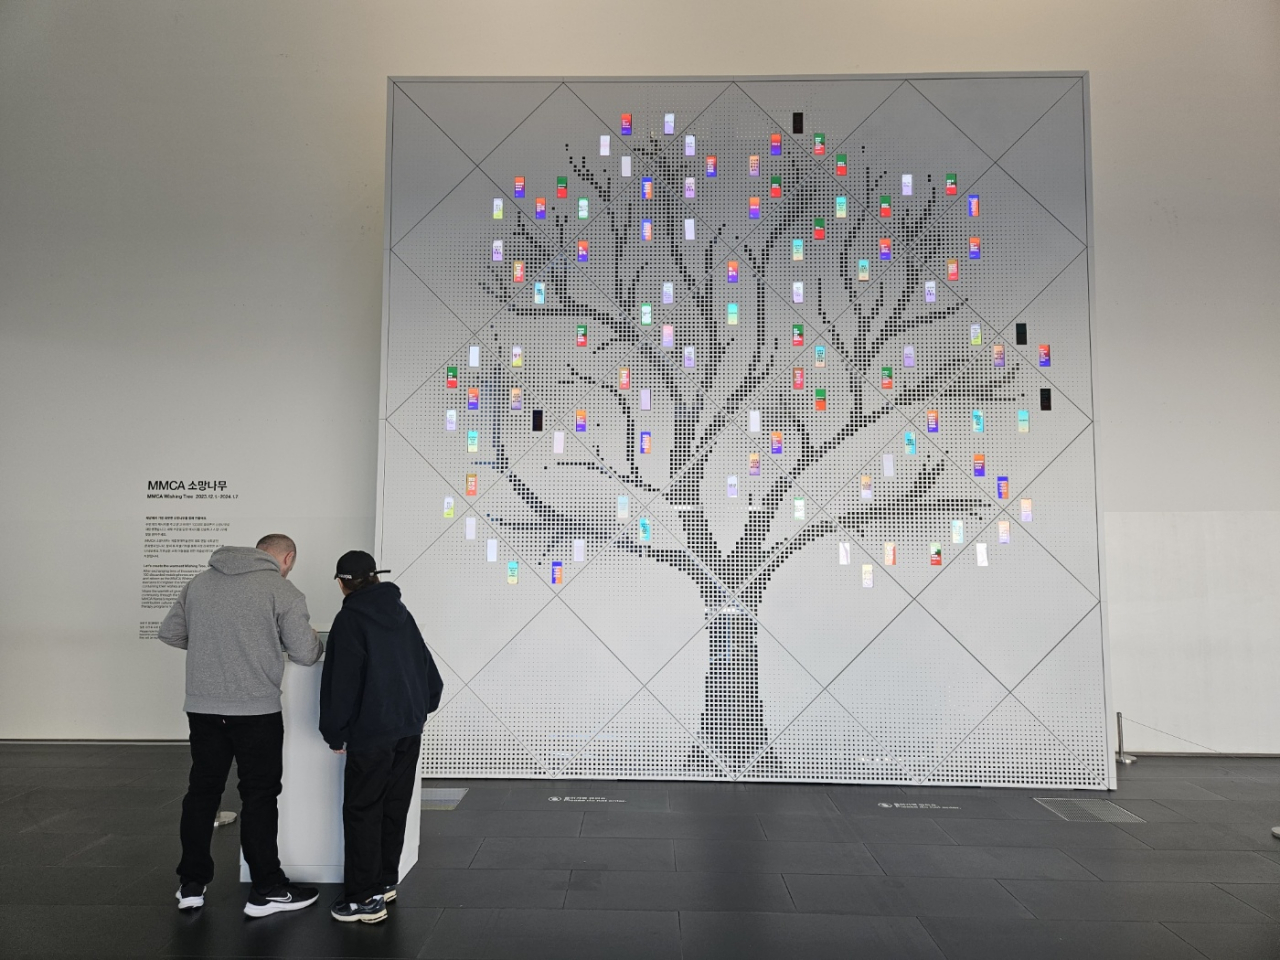 Visitors to MMCA Seoul type in a message to decorate the MMCA Wishing Tree on Friday. (Park Yuna/The Korea Herald)